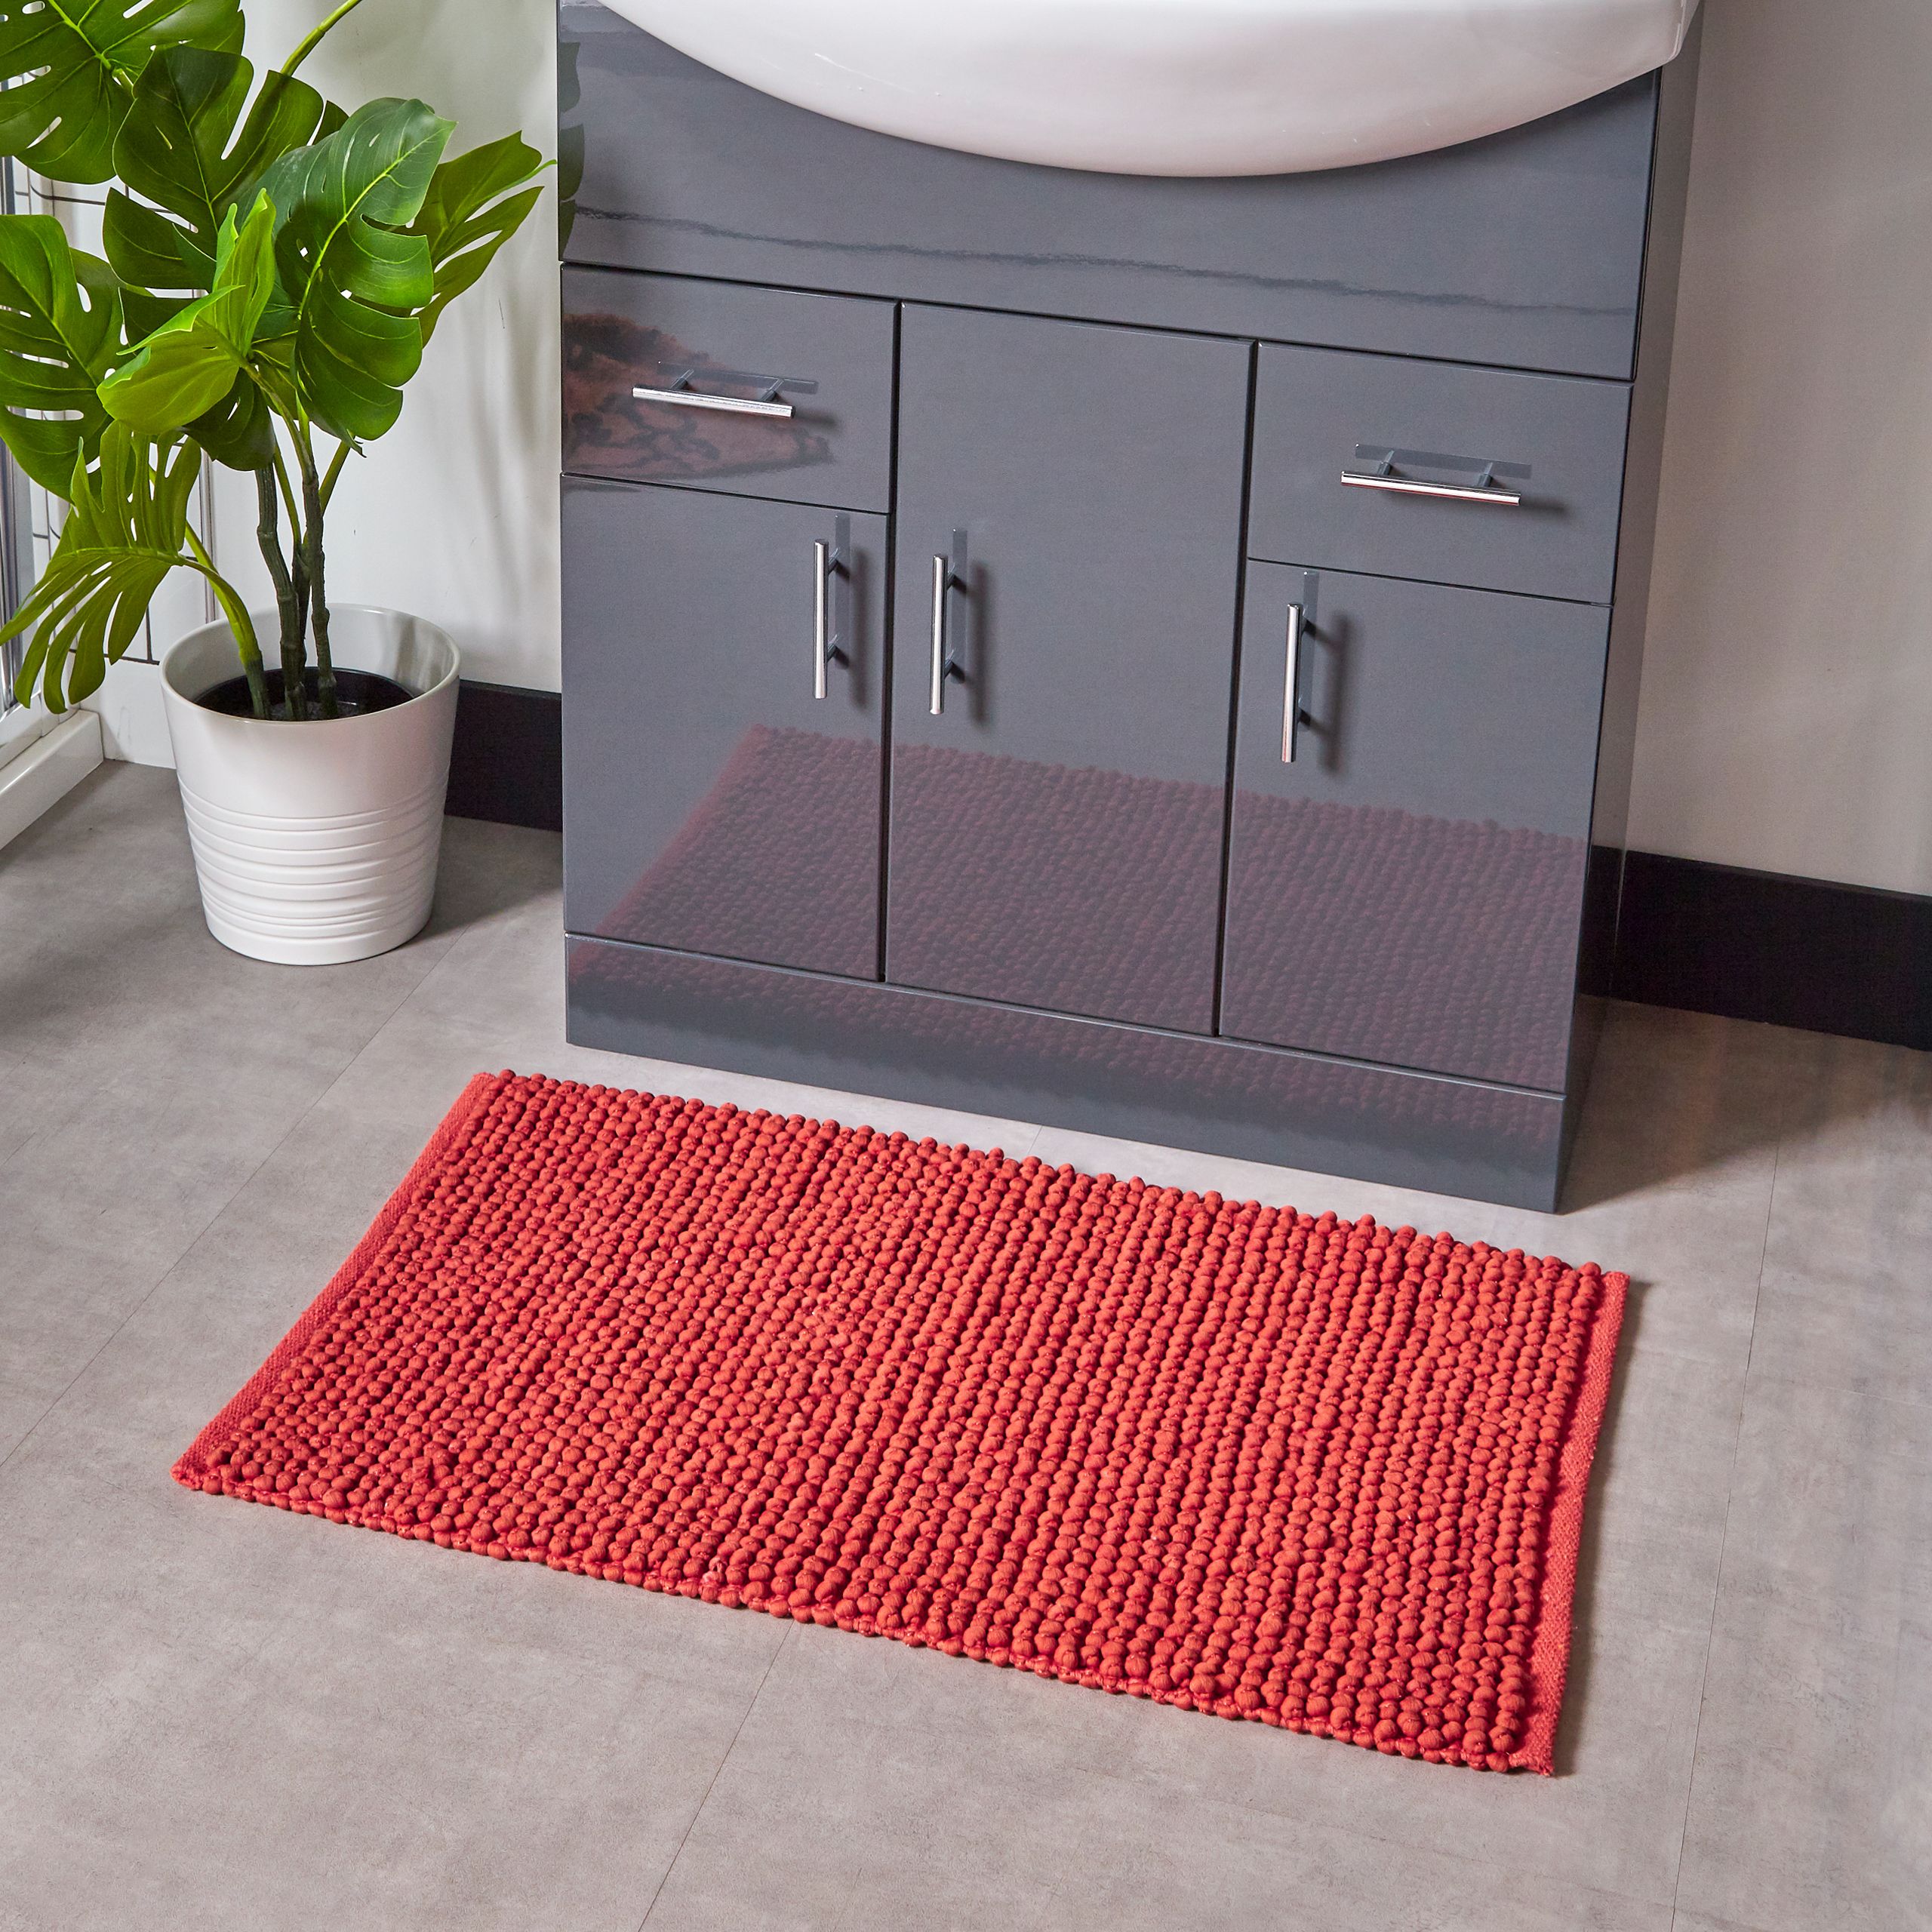 Featuring a woven bobble design in an array of stylish colours. Made from 100% Cotton, making this bath mat incredibly soft under foot. This bath mat has an anti-slip quality, keeping it securely in place on your bathroom floor. The 1900 GSM ensures this bath mat is super absorbent preventing post-bath or shower puddles.